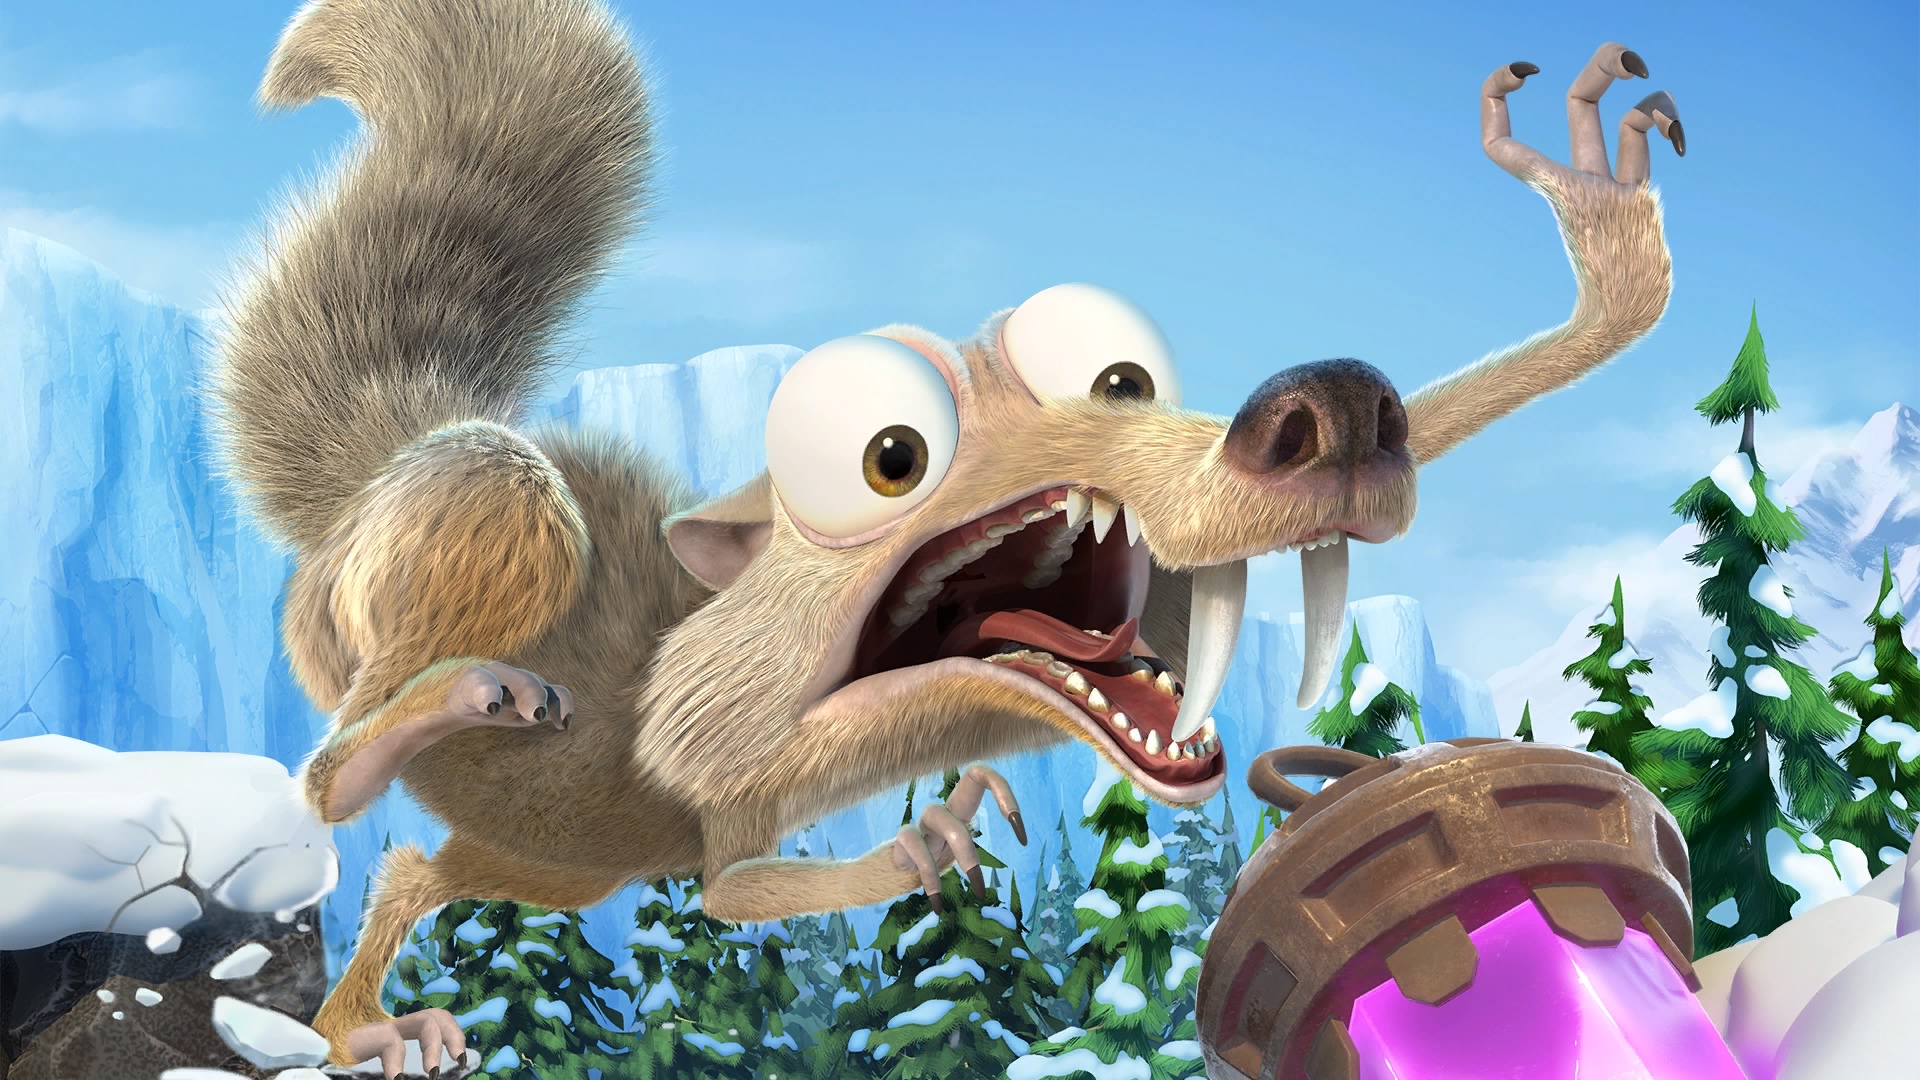 Ice Age Scrats Nutty Review - Why?